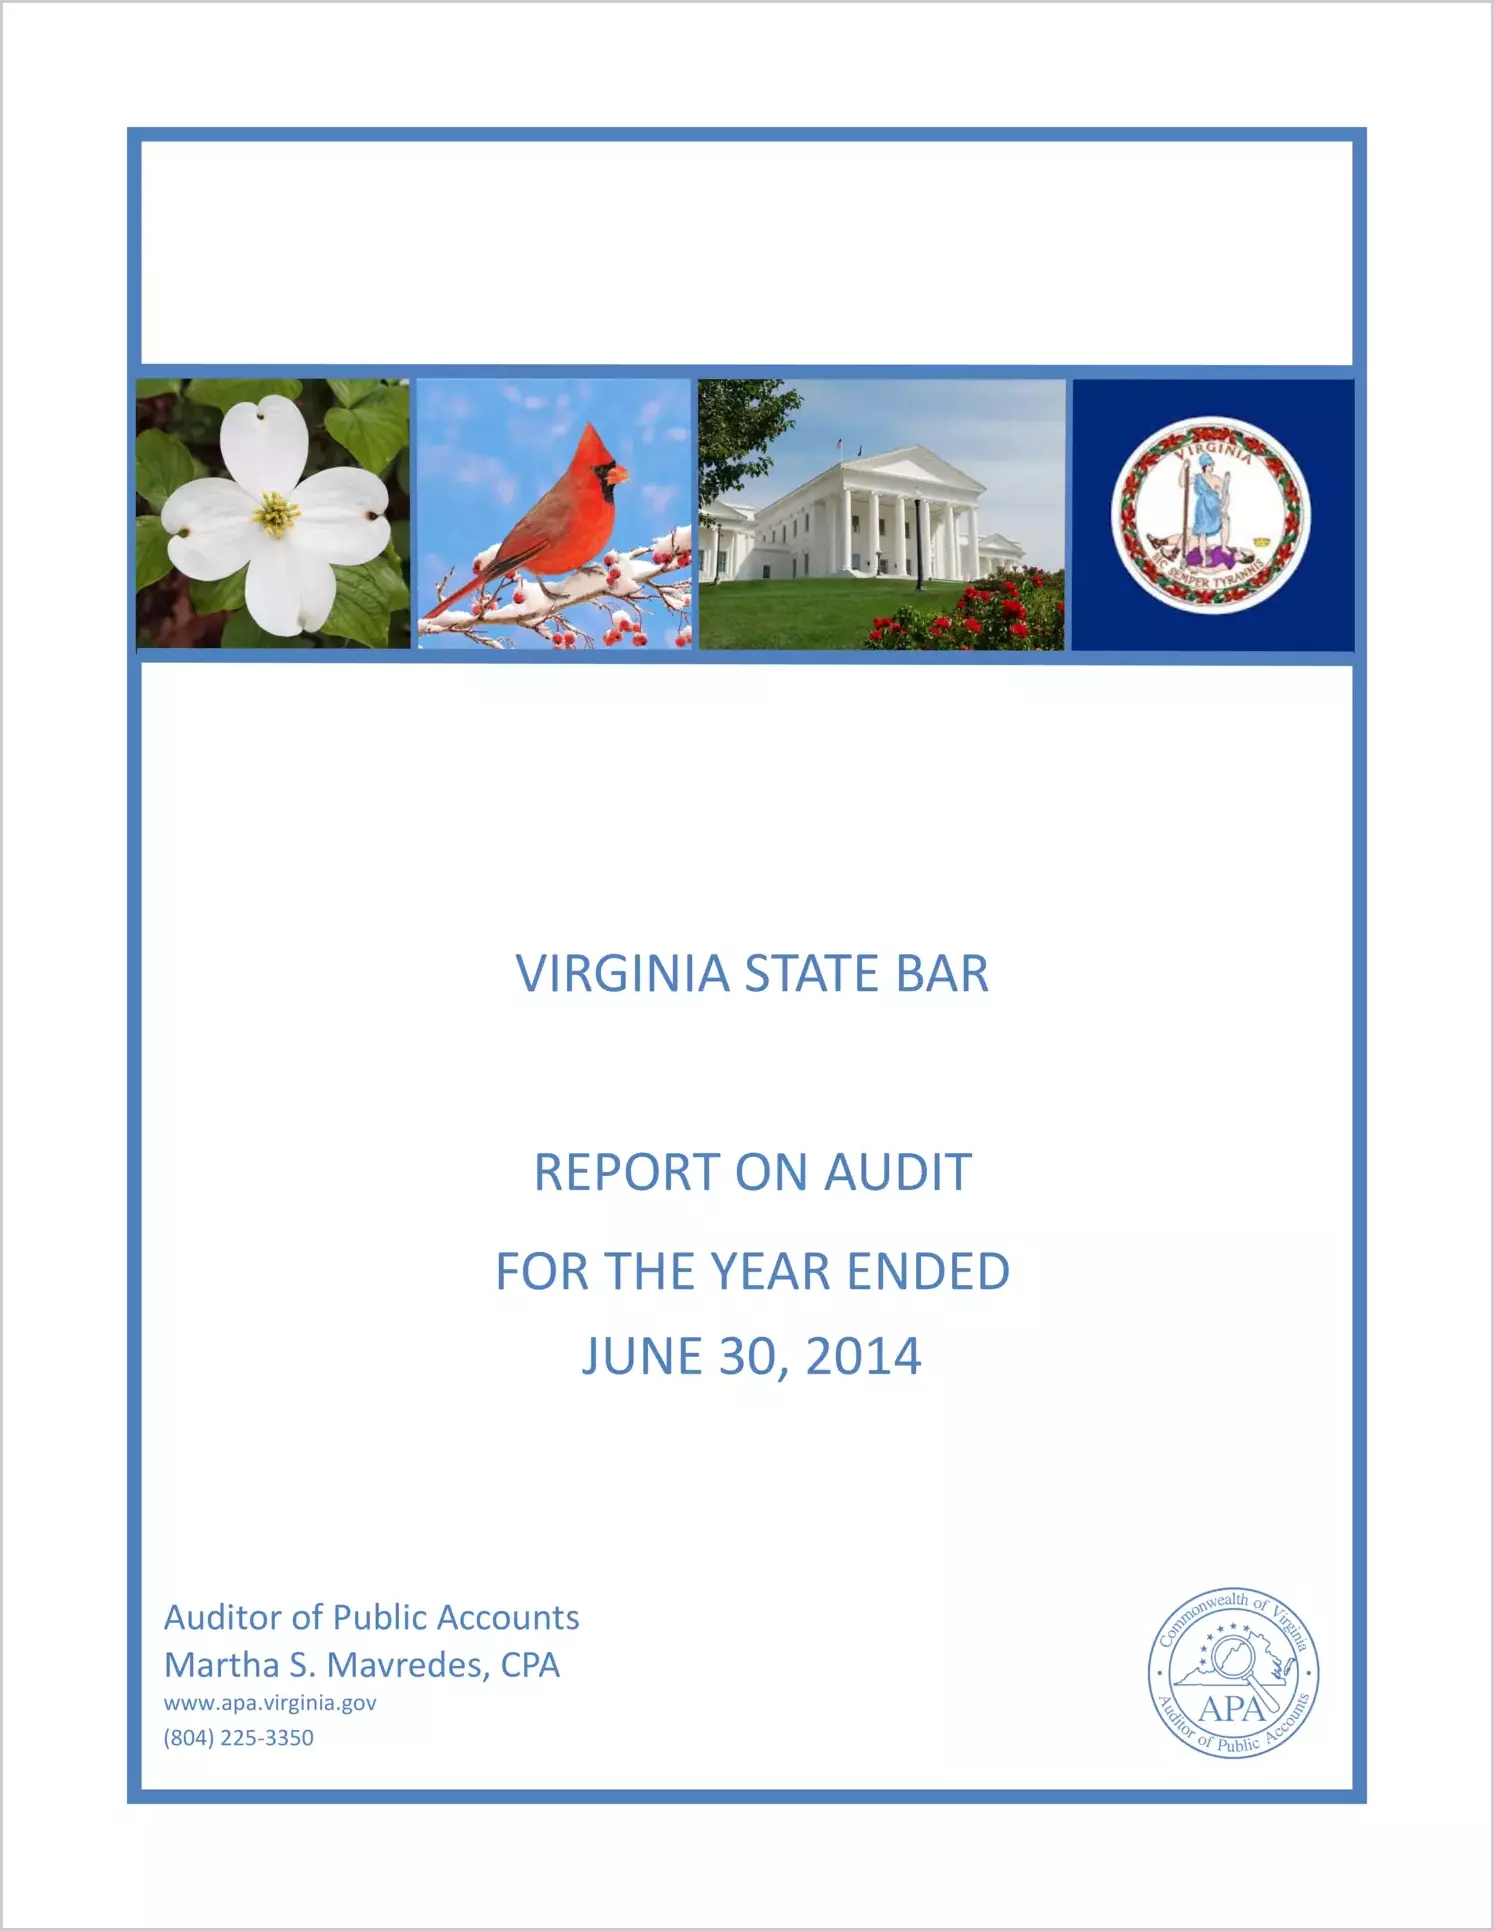 Virginia State Bar for the year ended June 30, 2014